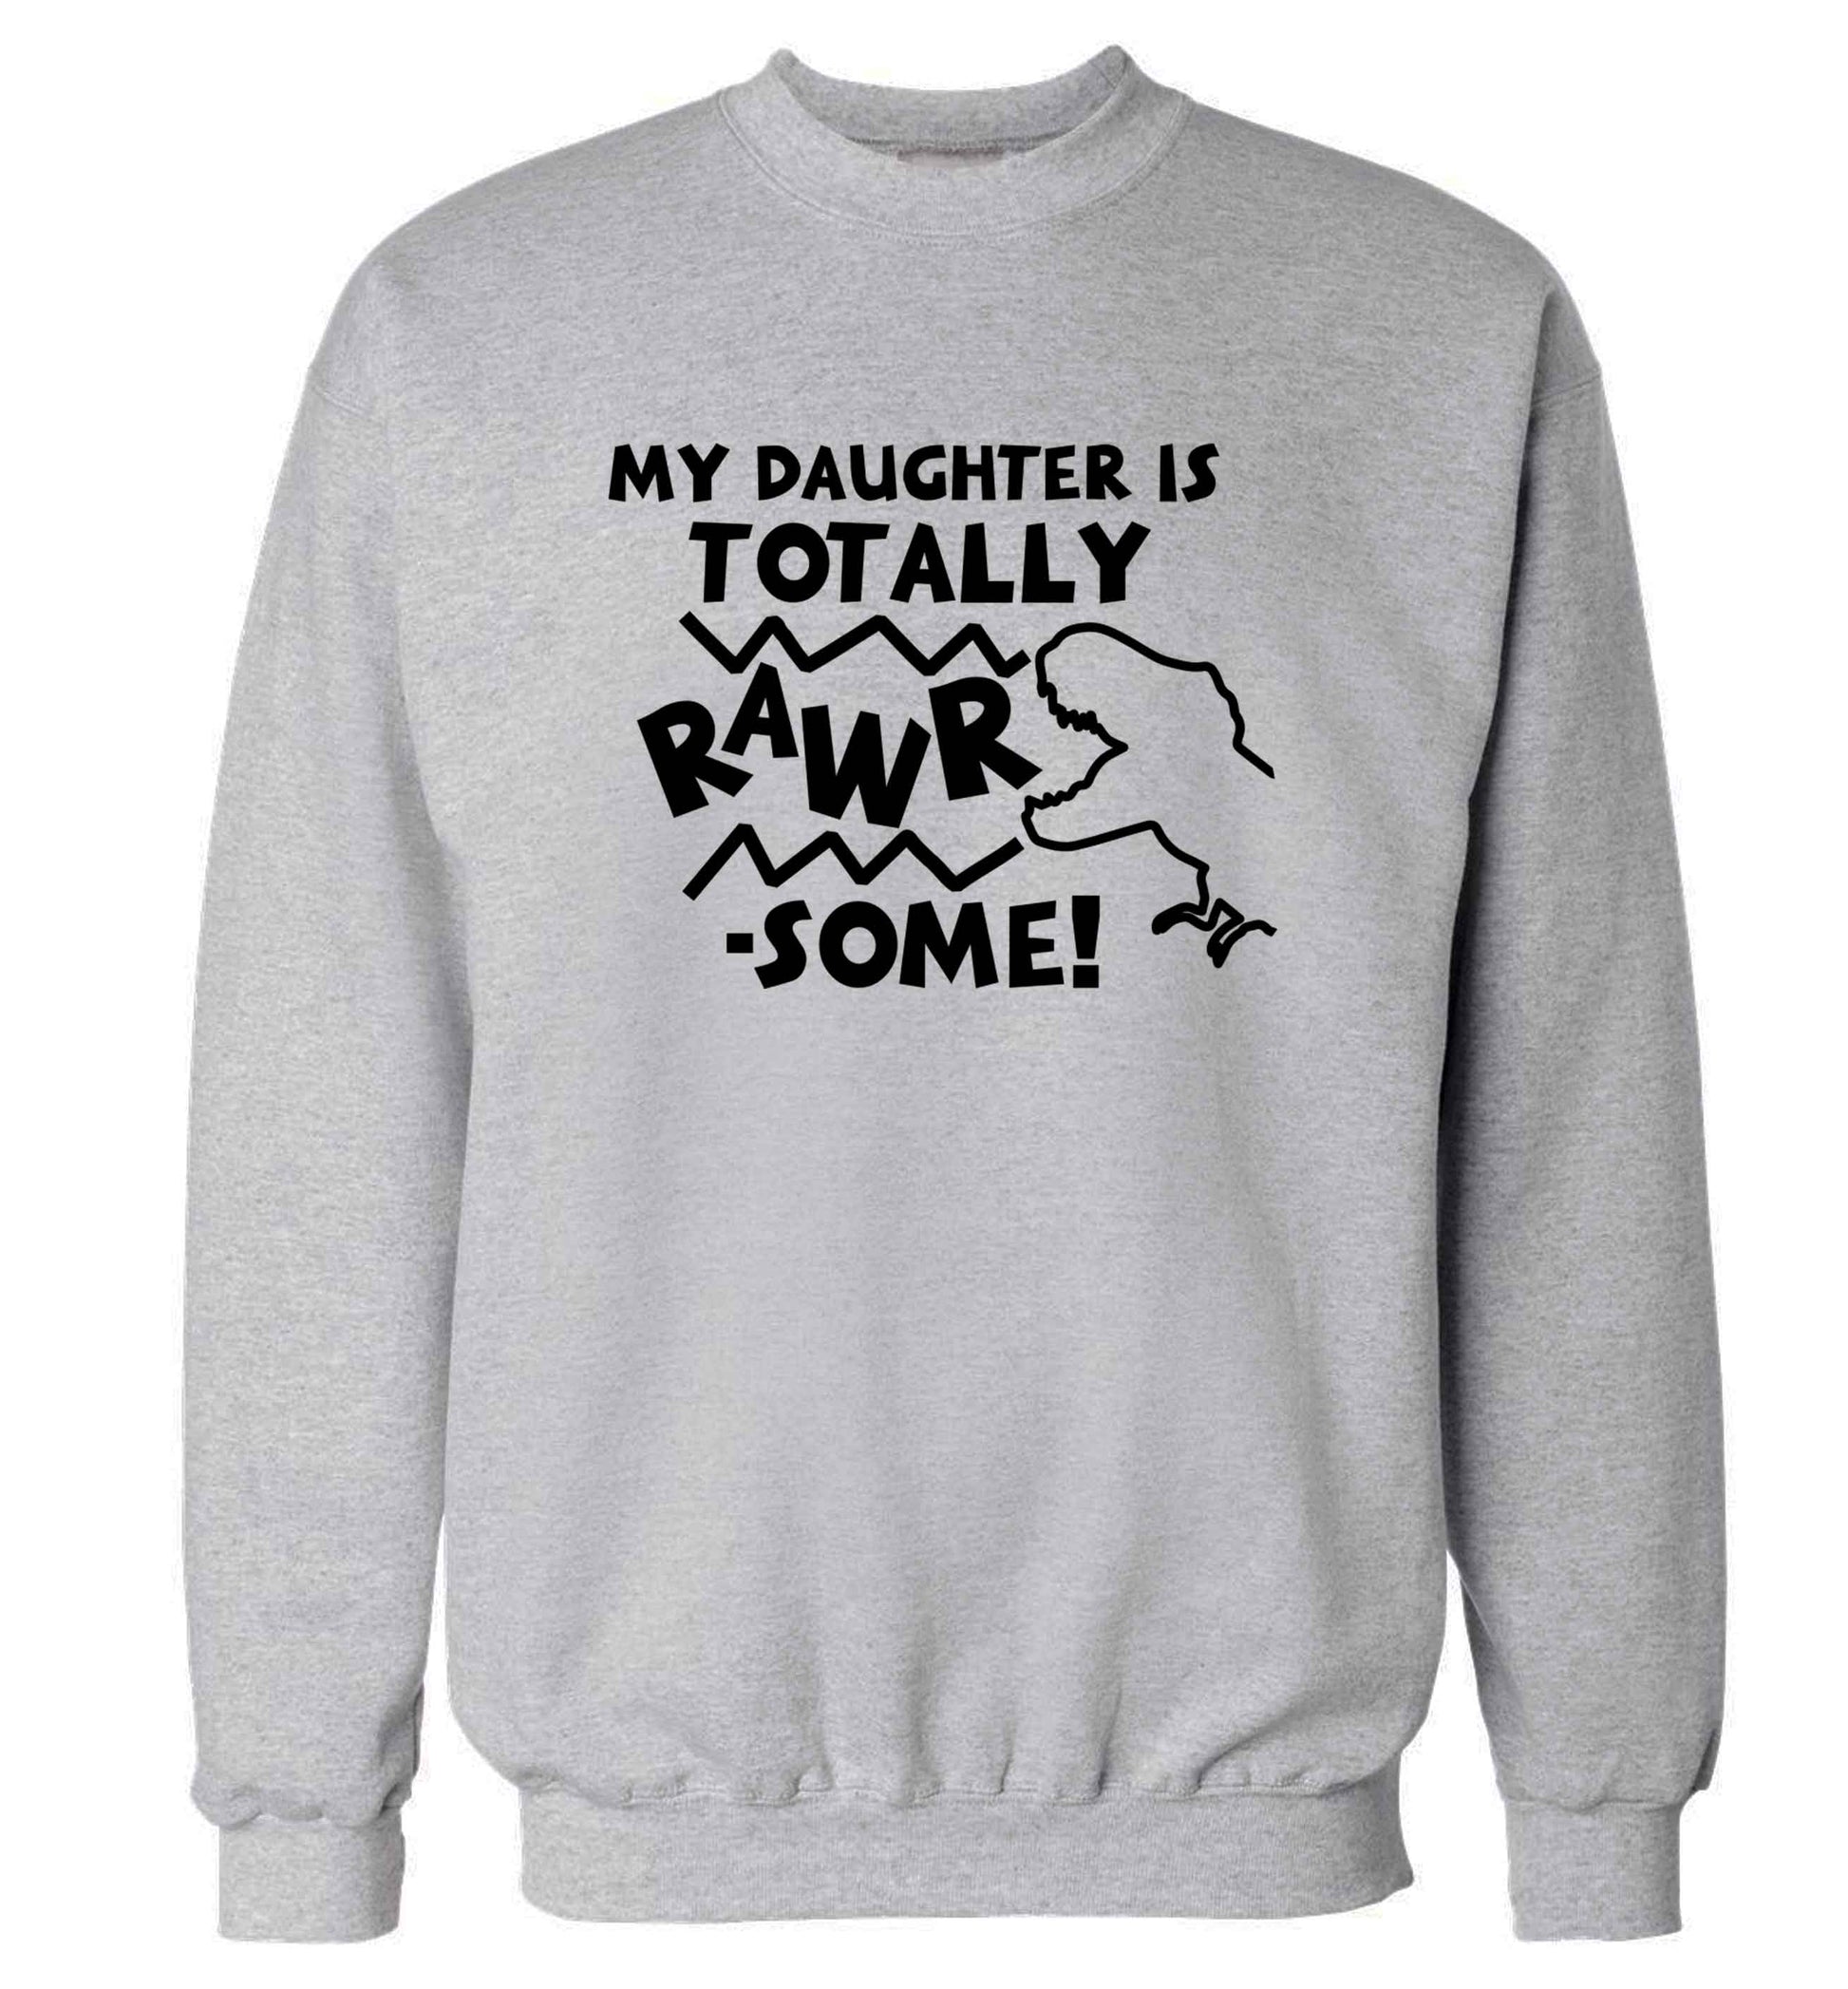 My daughter is totally rawrsome adult's unisex grey sweater 2XL